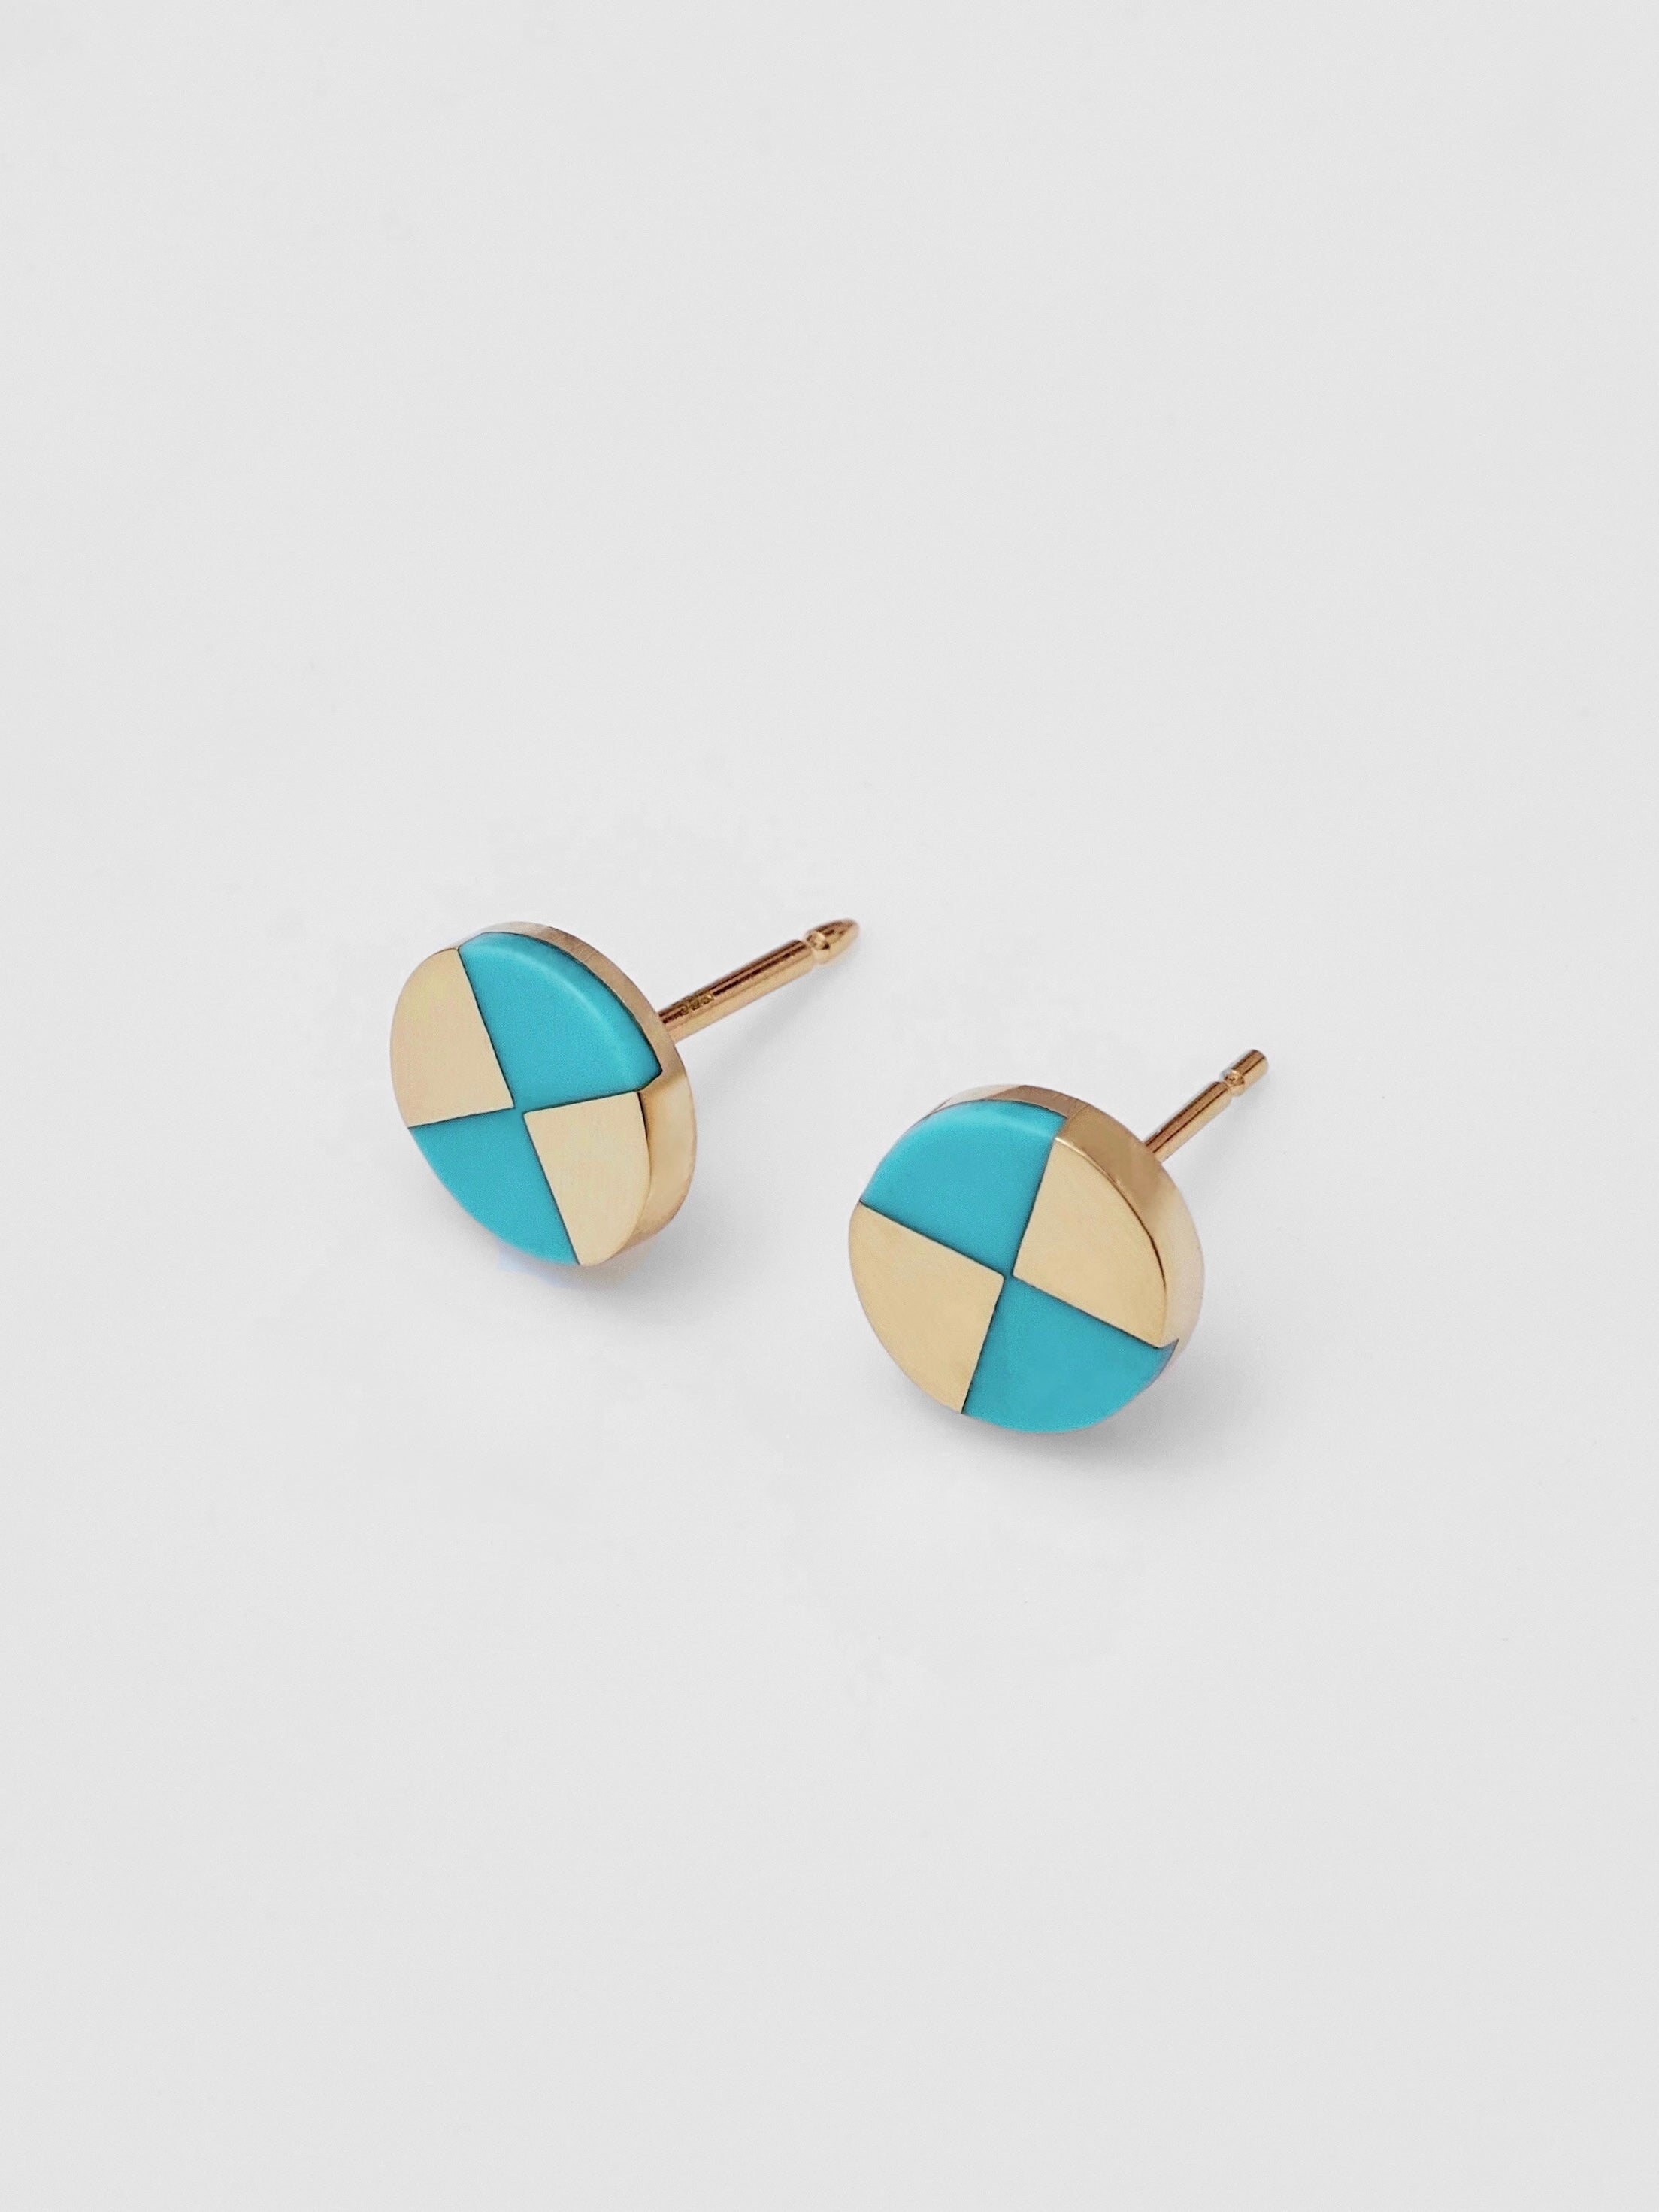 Ray Studs in 10k Yellow with Kingman Turquoise